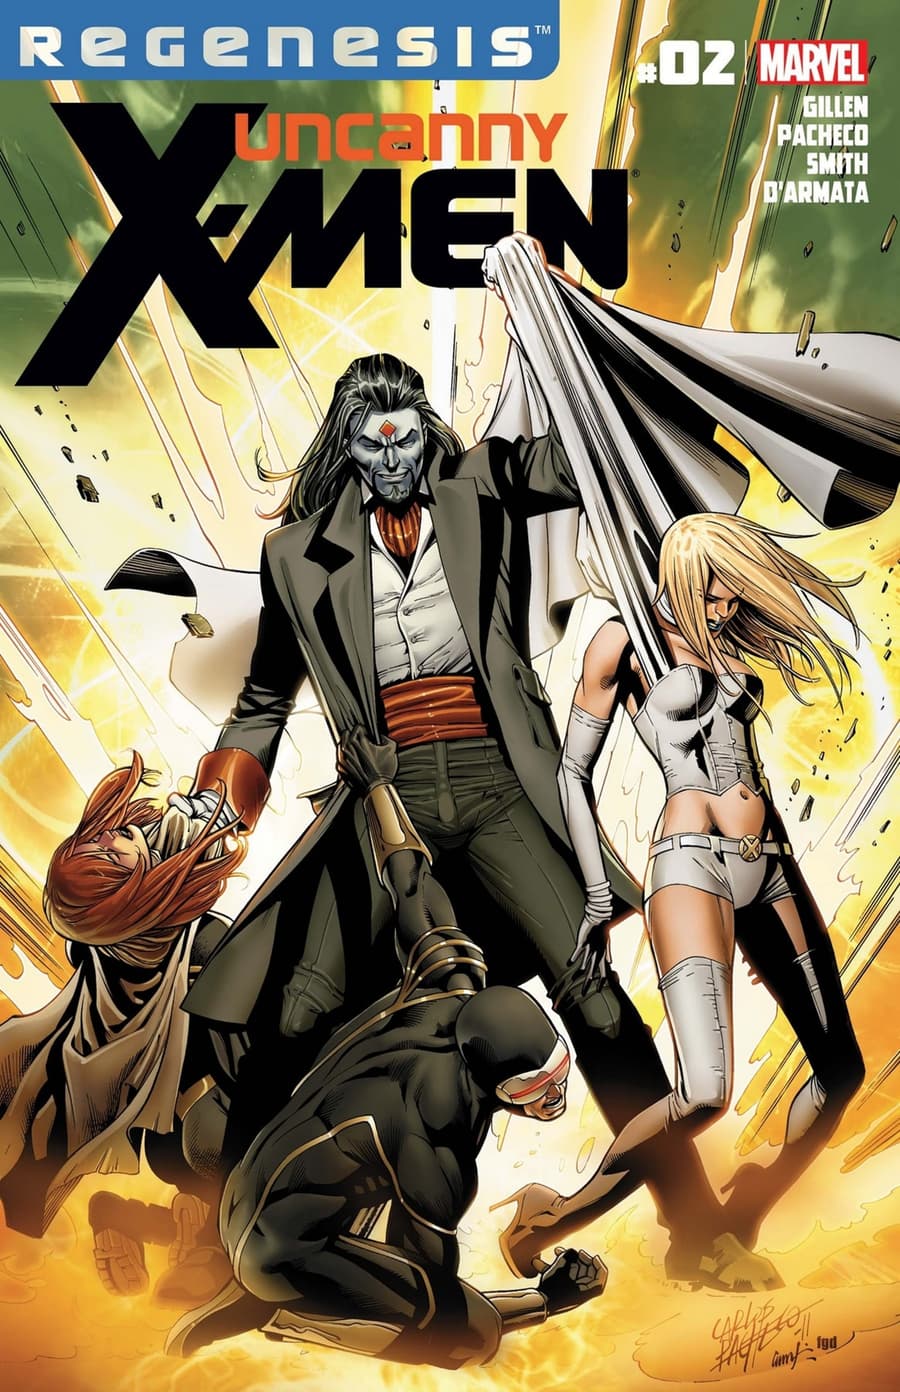 UNCANNY X-MEN (2011) #2 cover by Carlos Pacheco, Cam Smith, and Frank D’Armata